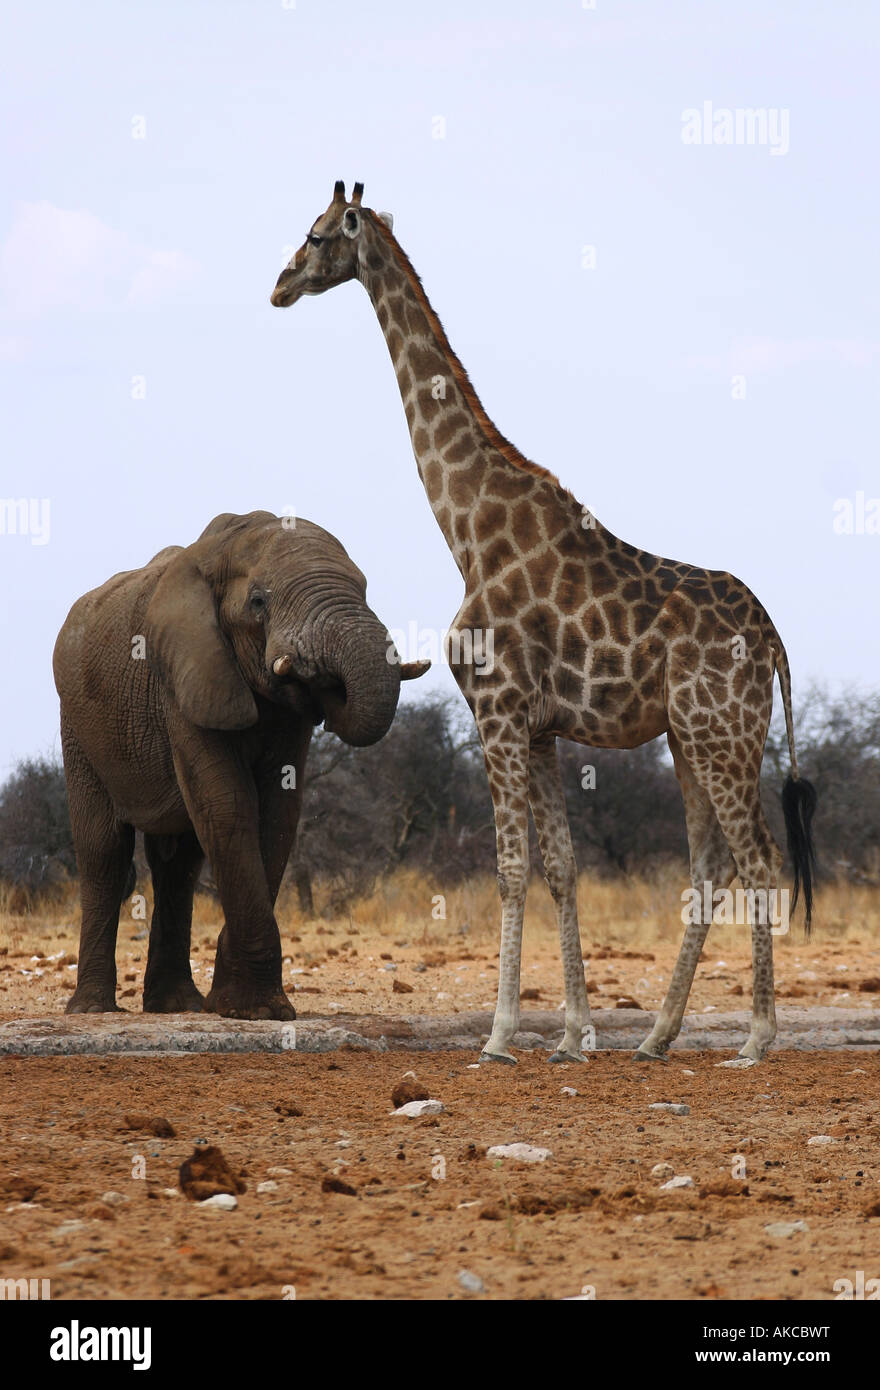 A giraffe giraffa camelopardalis and elephant loxodonta Africana drink at a watering hole in Etosha National Park in Namibia Afr Stock Photo